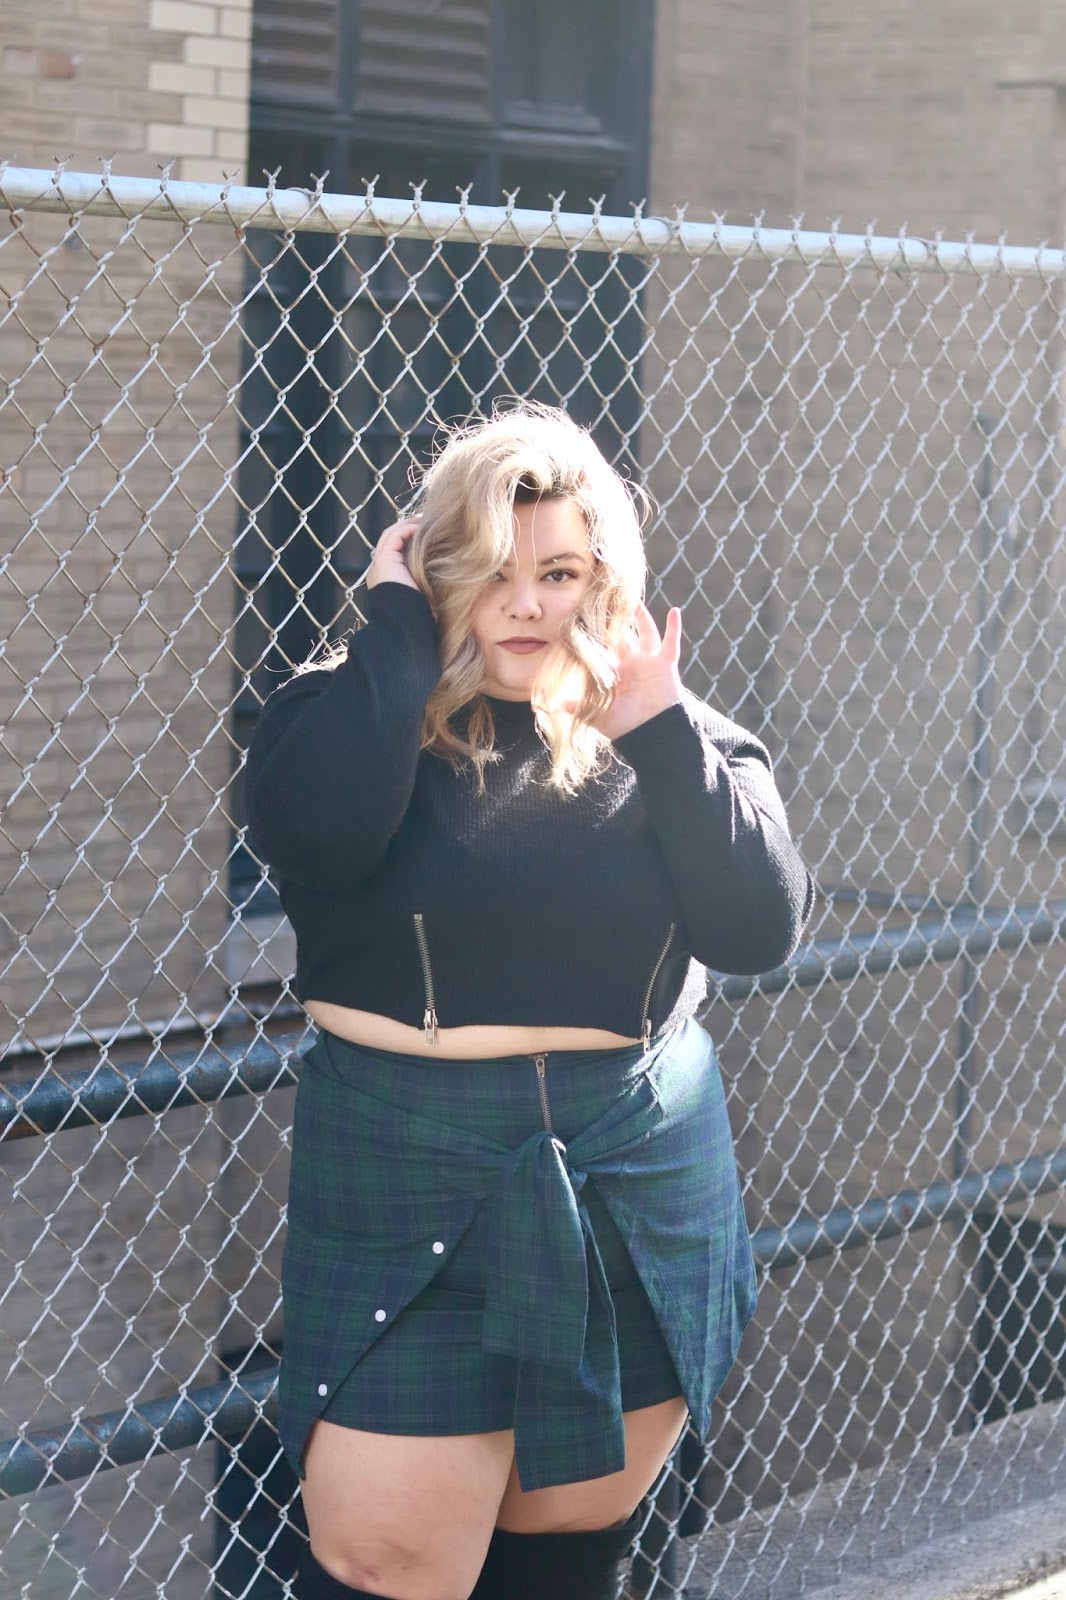 Chicago Plus Size Petite Fashion Blogger and model Natalie Craig reviews Soncy's Not Your Average Plaid Skirt and The Zip It Up Lightweight Sweater.